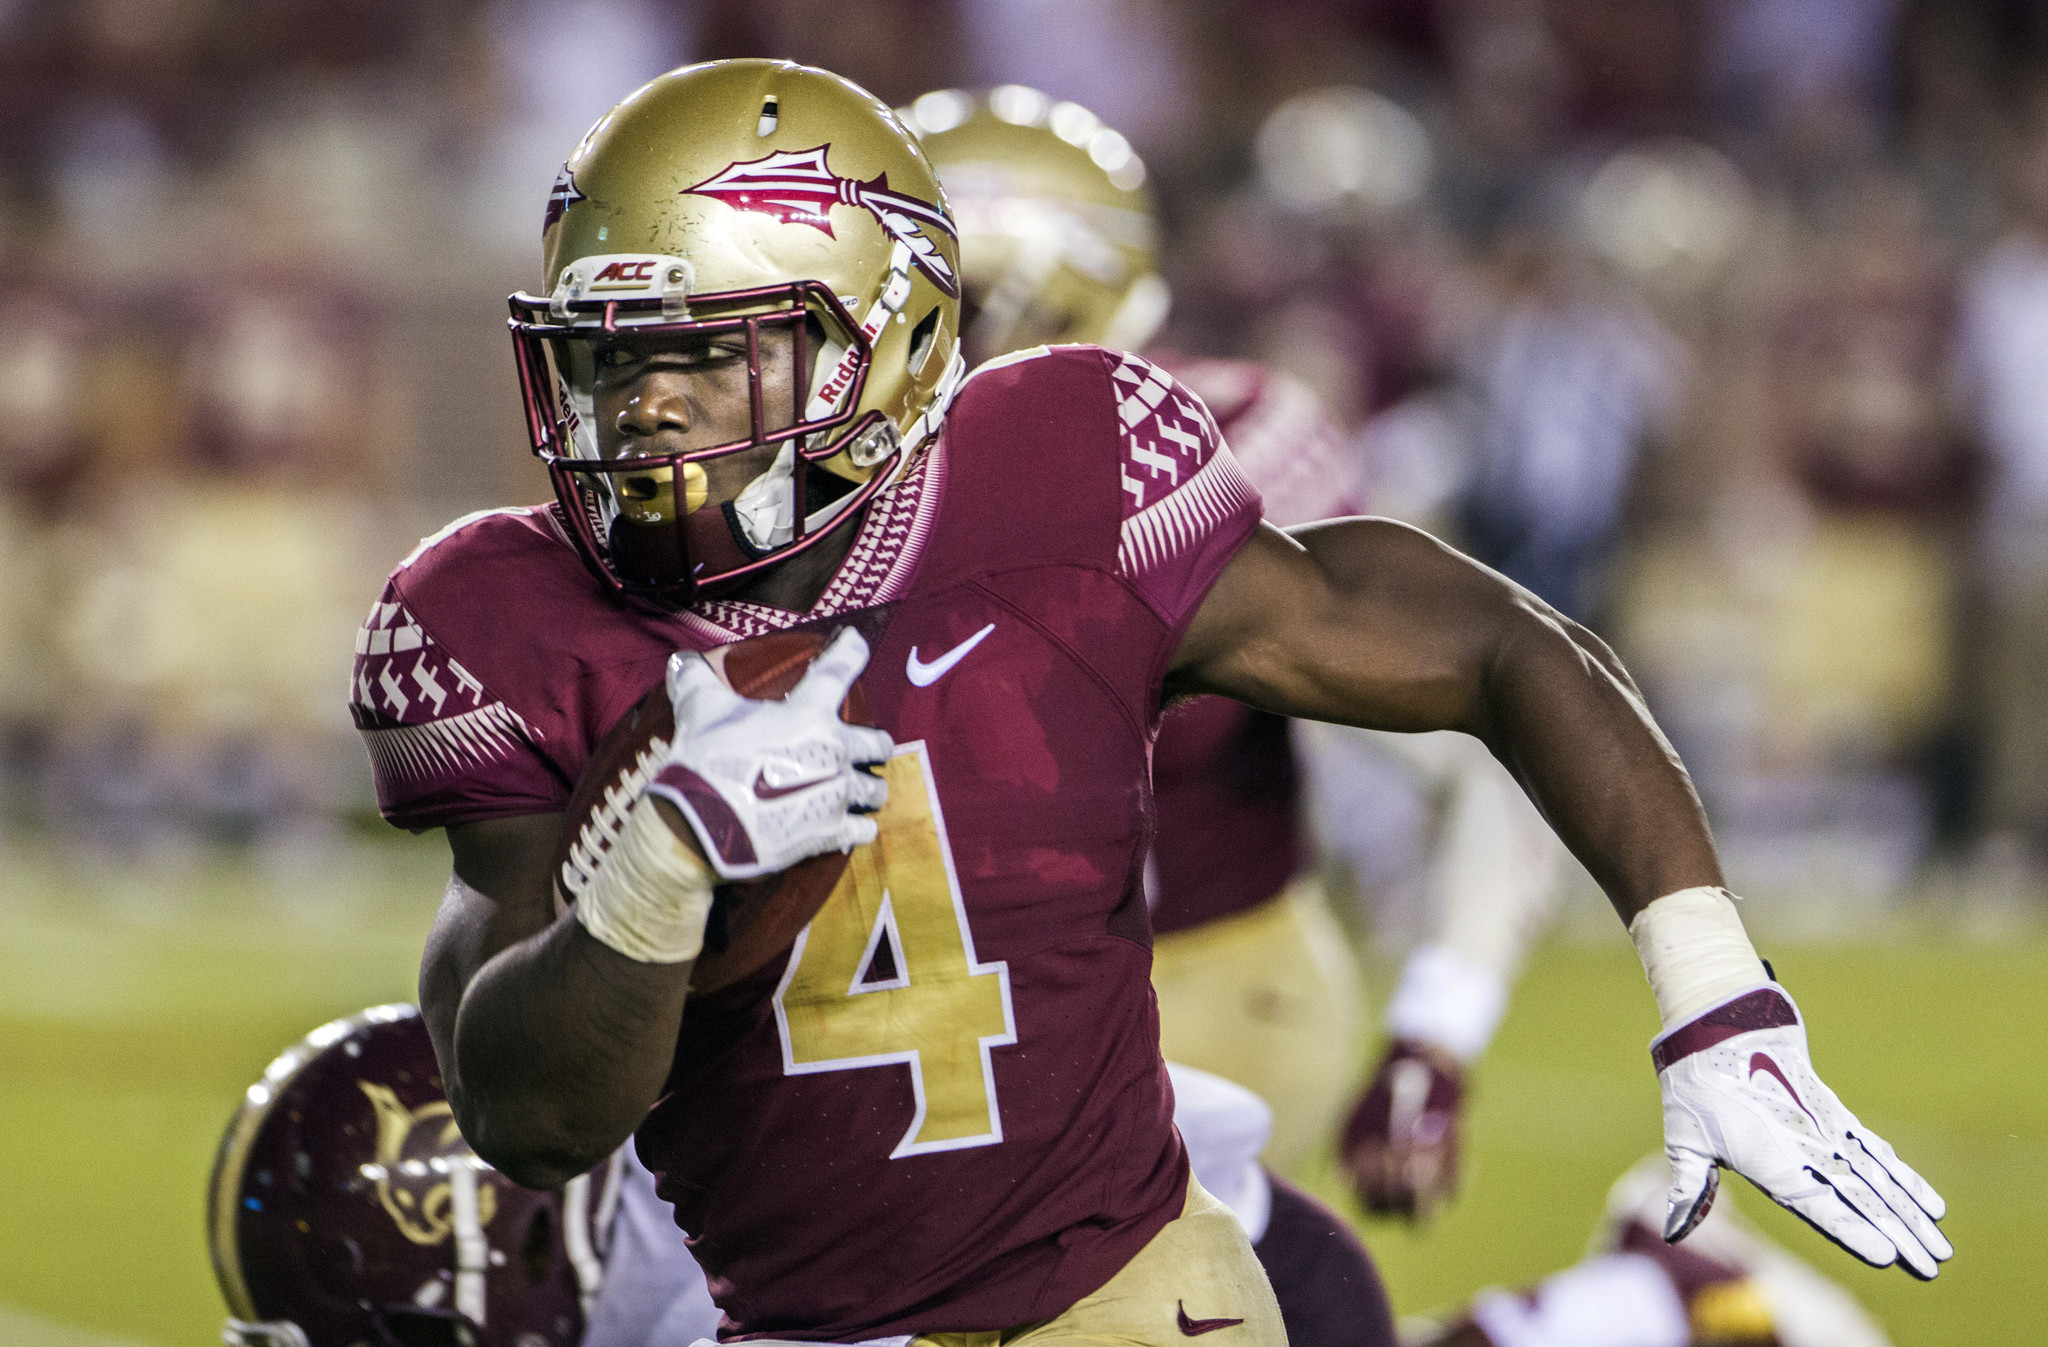 os-fsu-injury-update-dalvin-cook-terrance-smith-nate-andrews-20151005